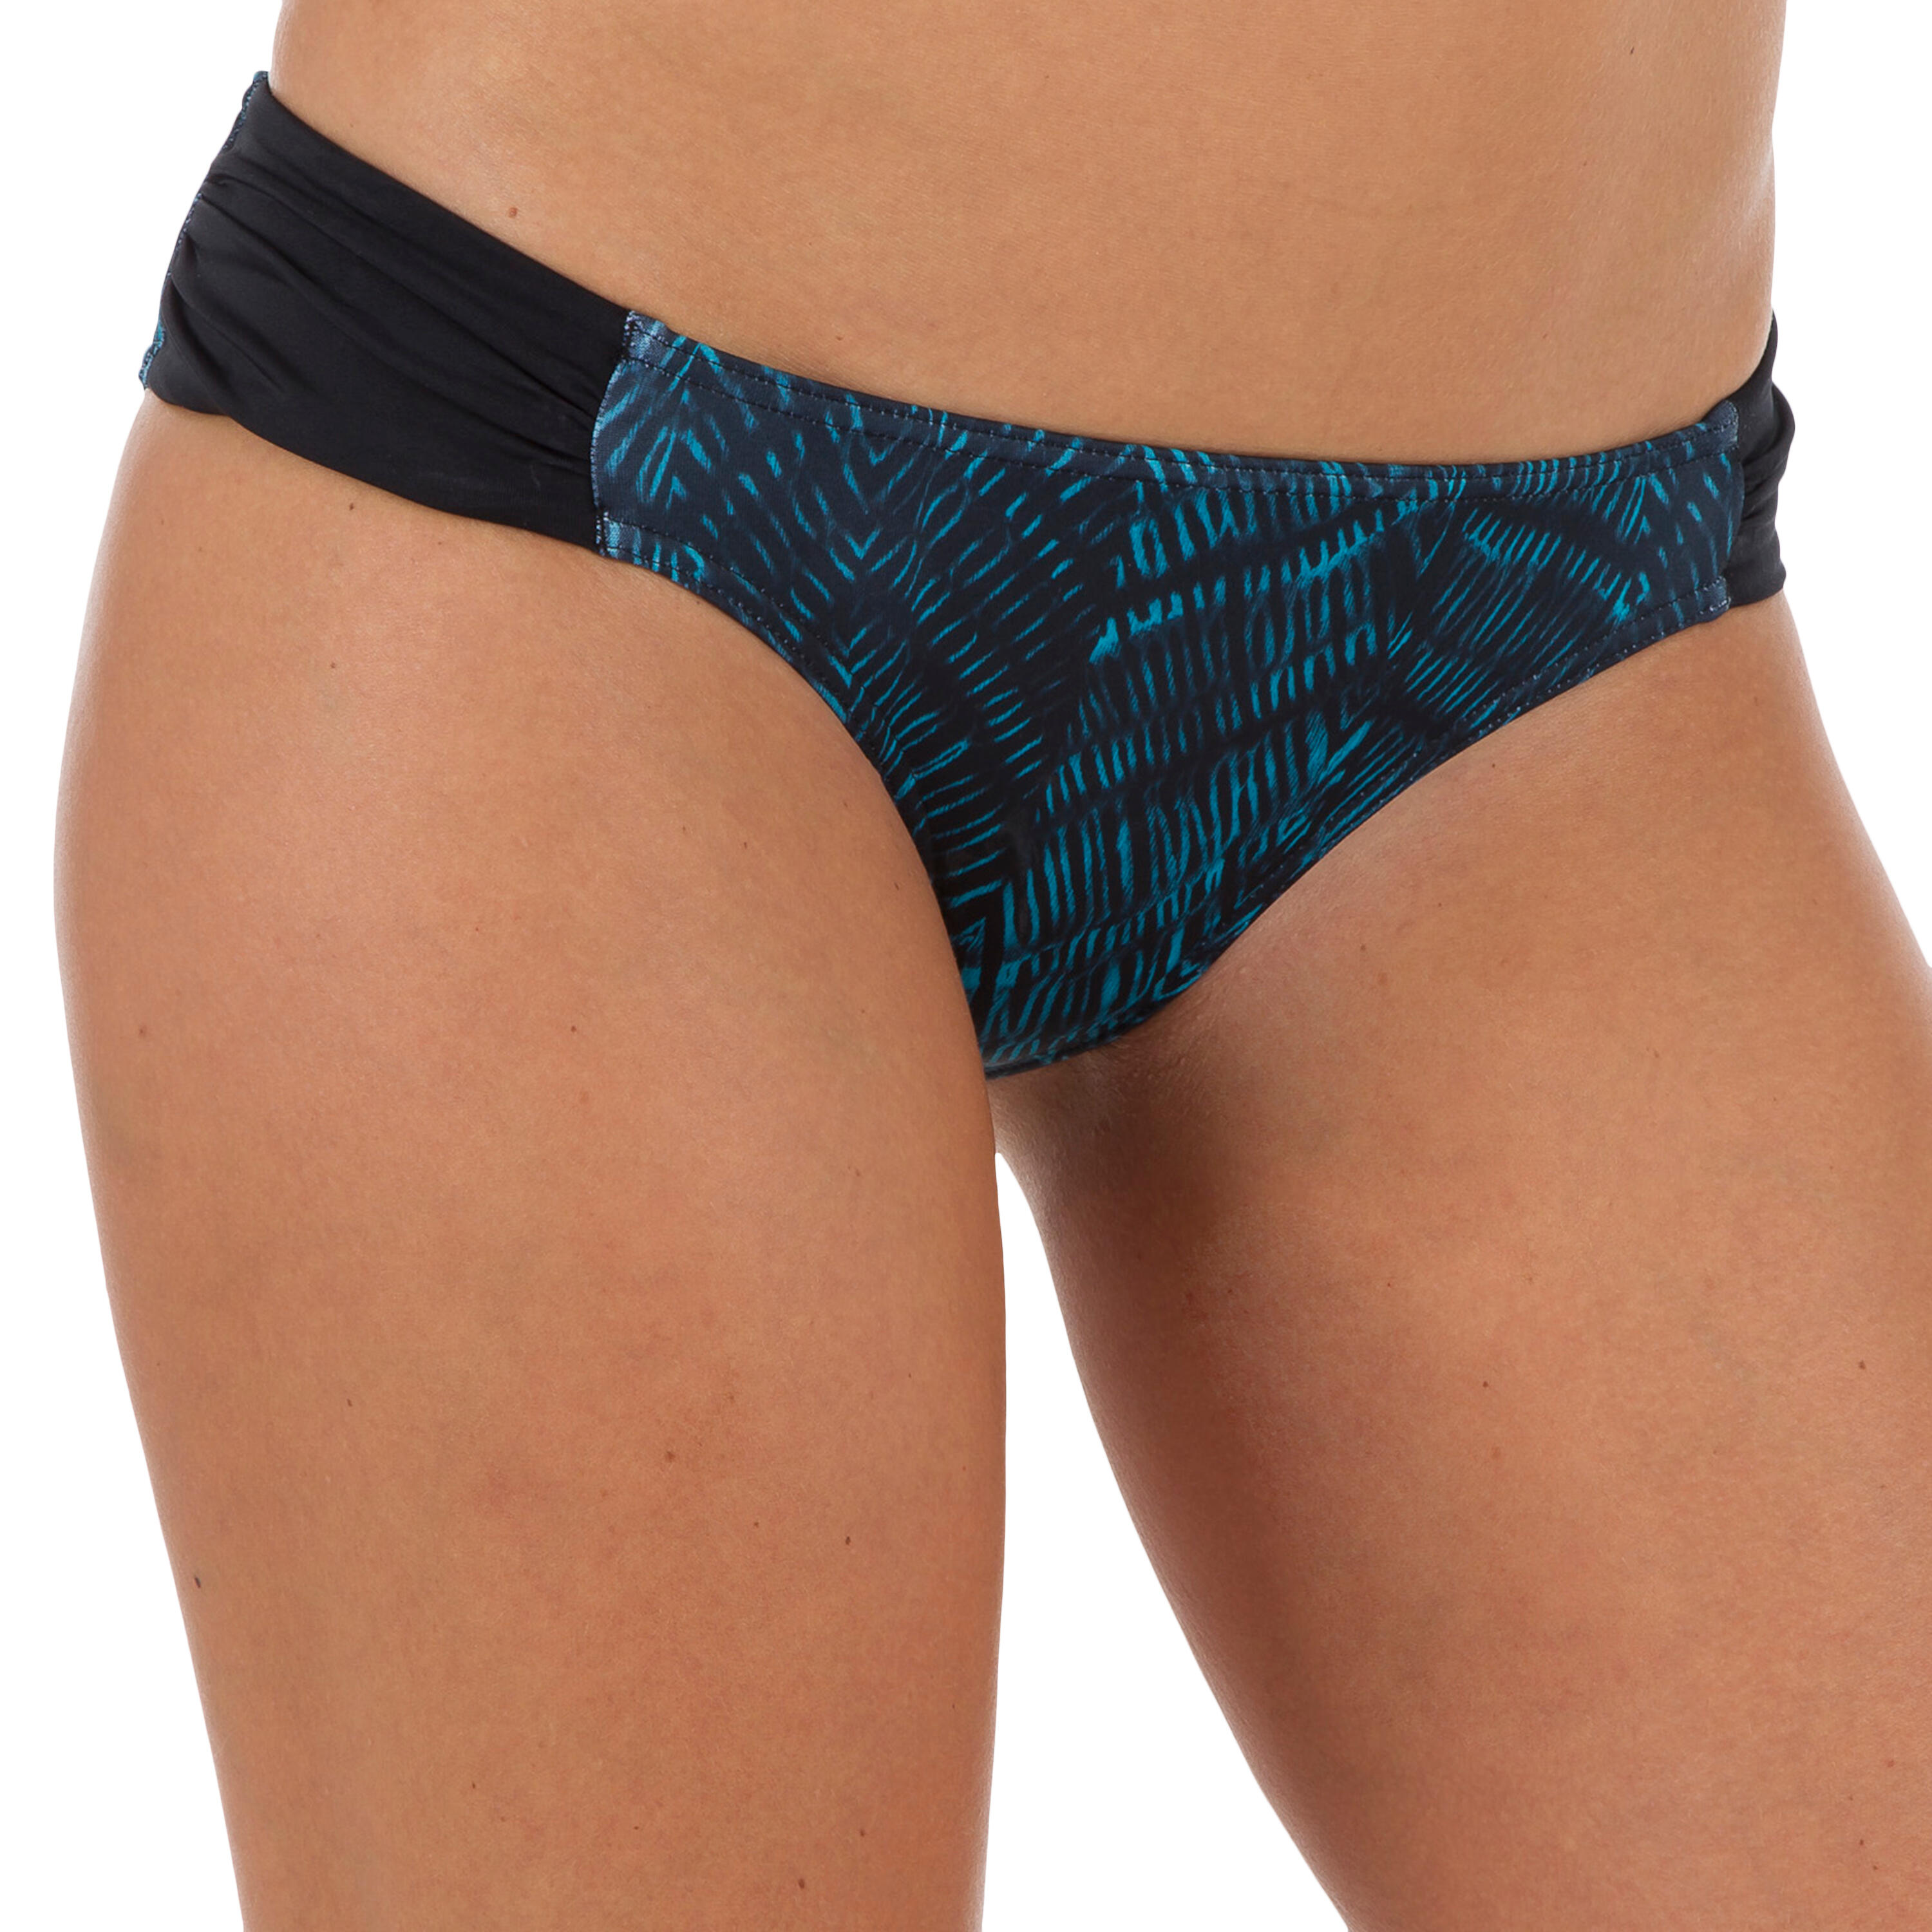 OLAIAN Niki Women's Surfing Swimsuit Bottoms with Gathering at the Sides - Shibo Blue